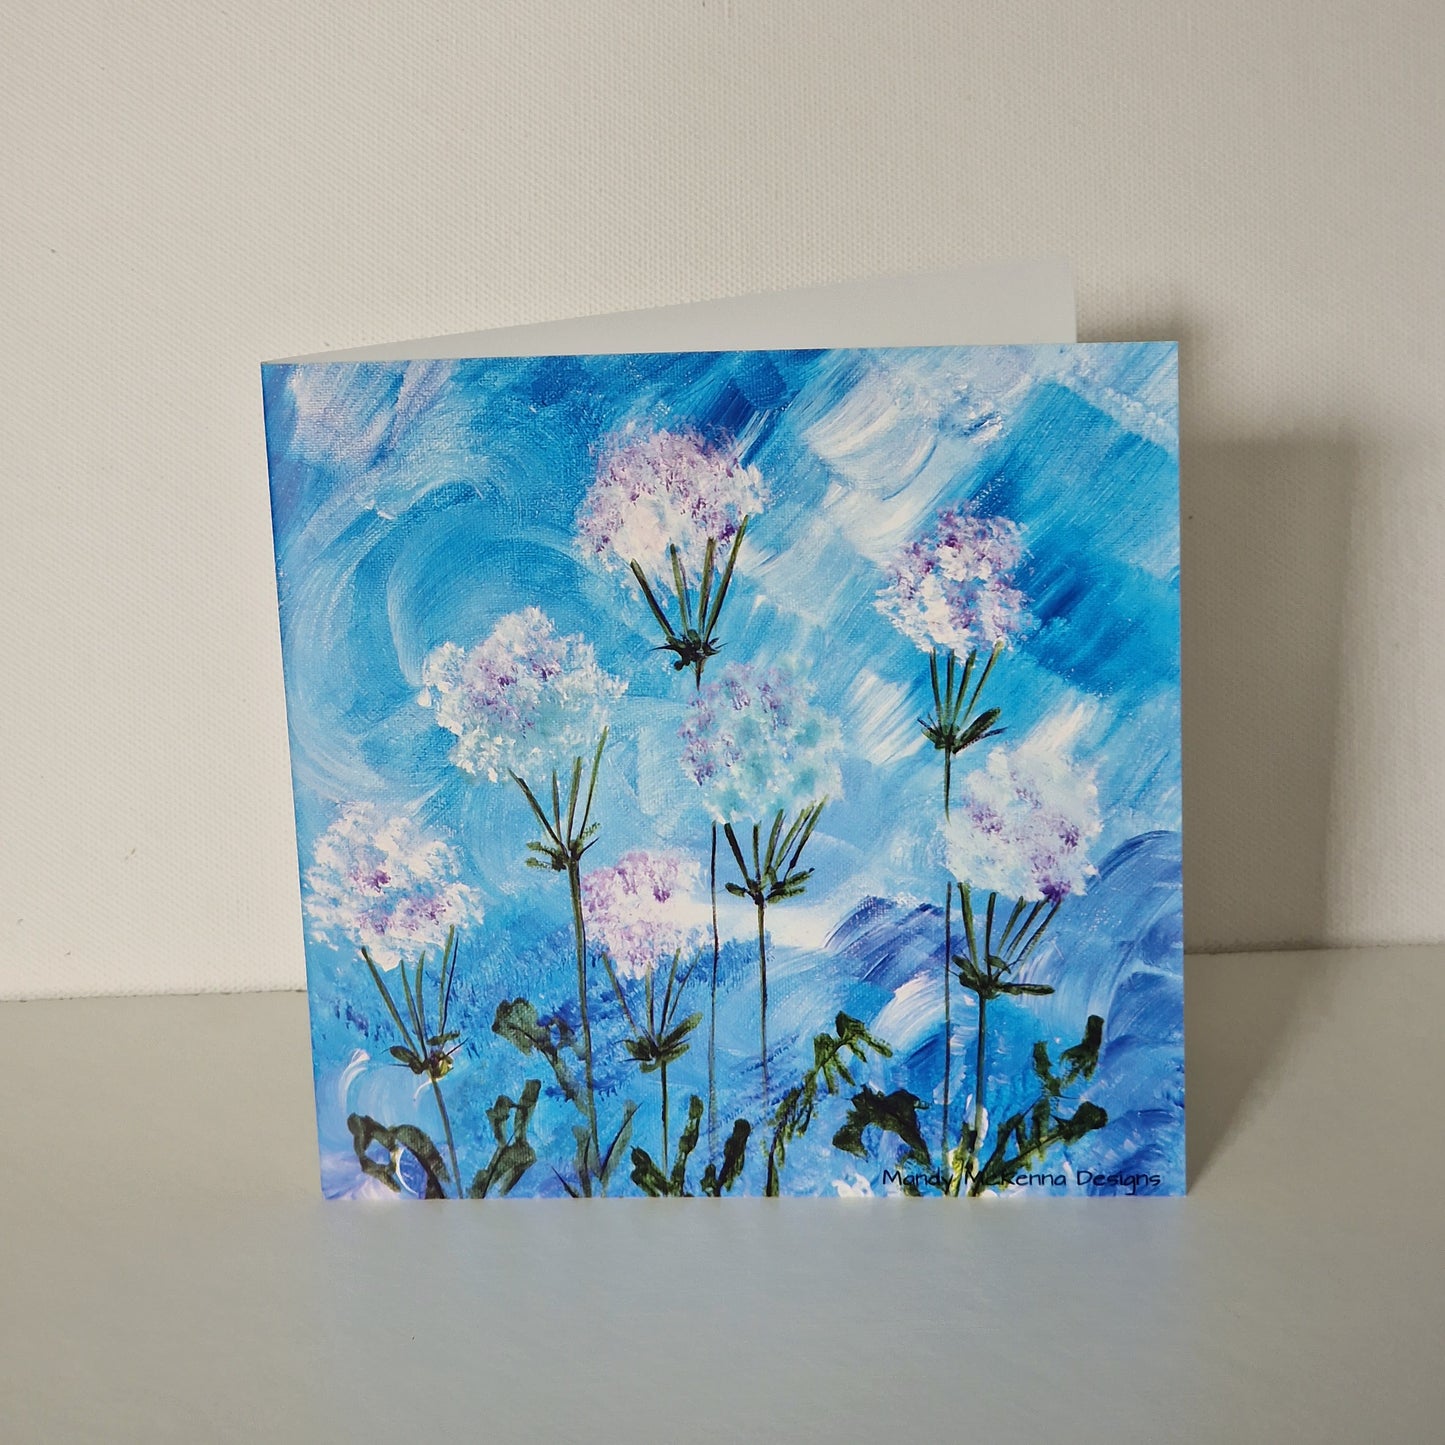 Greetings Card - Mixed Set of 4 Florals